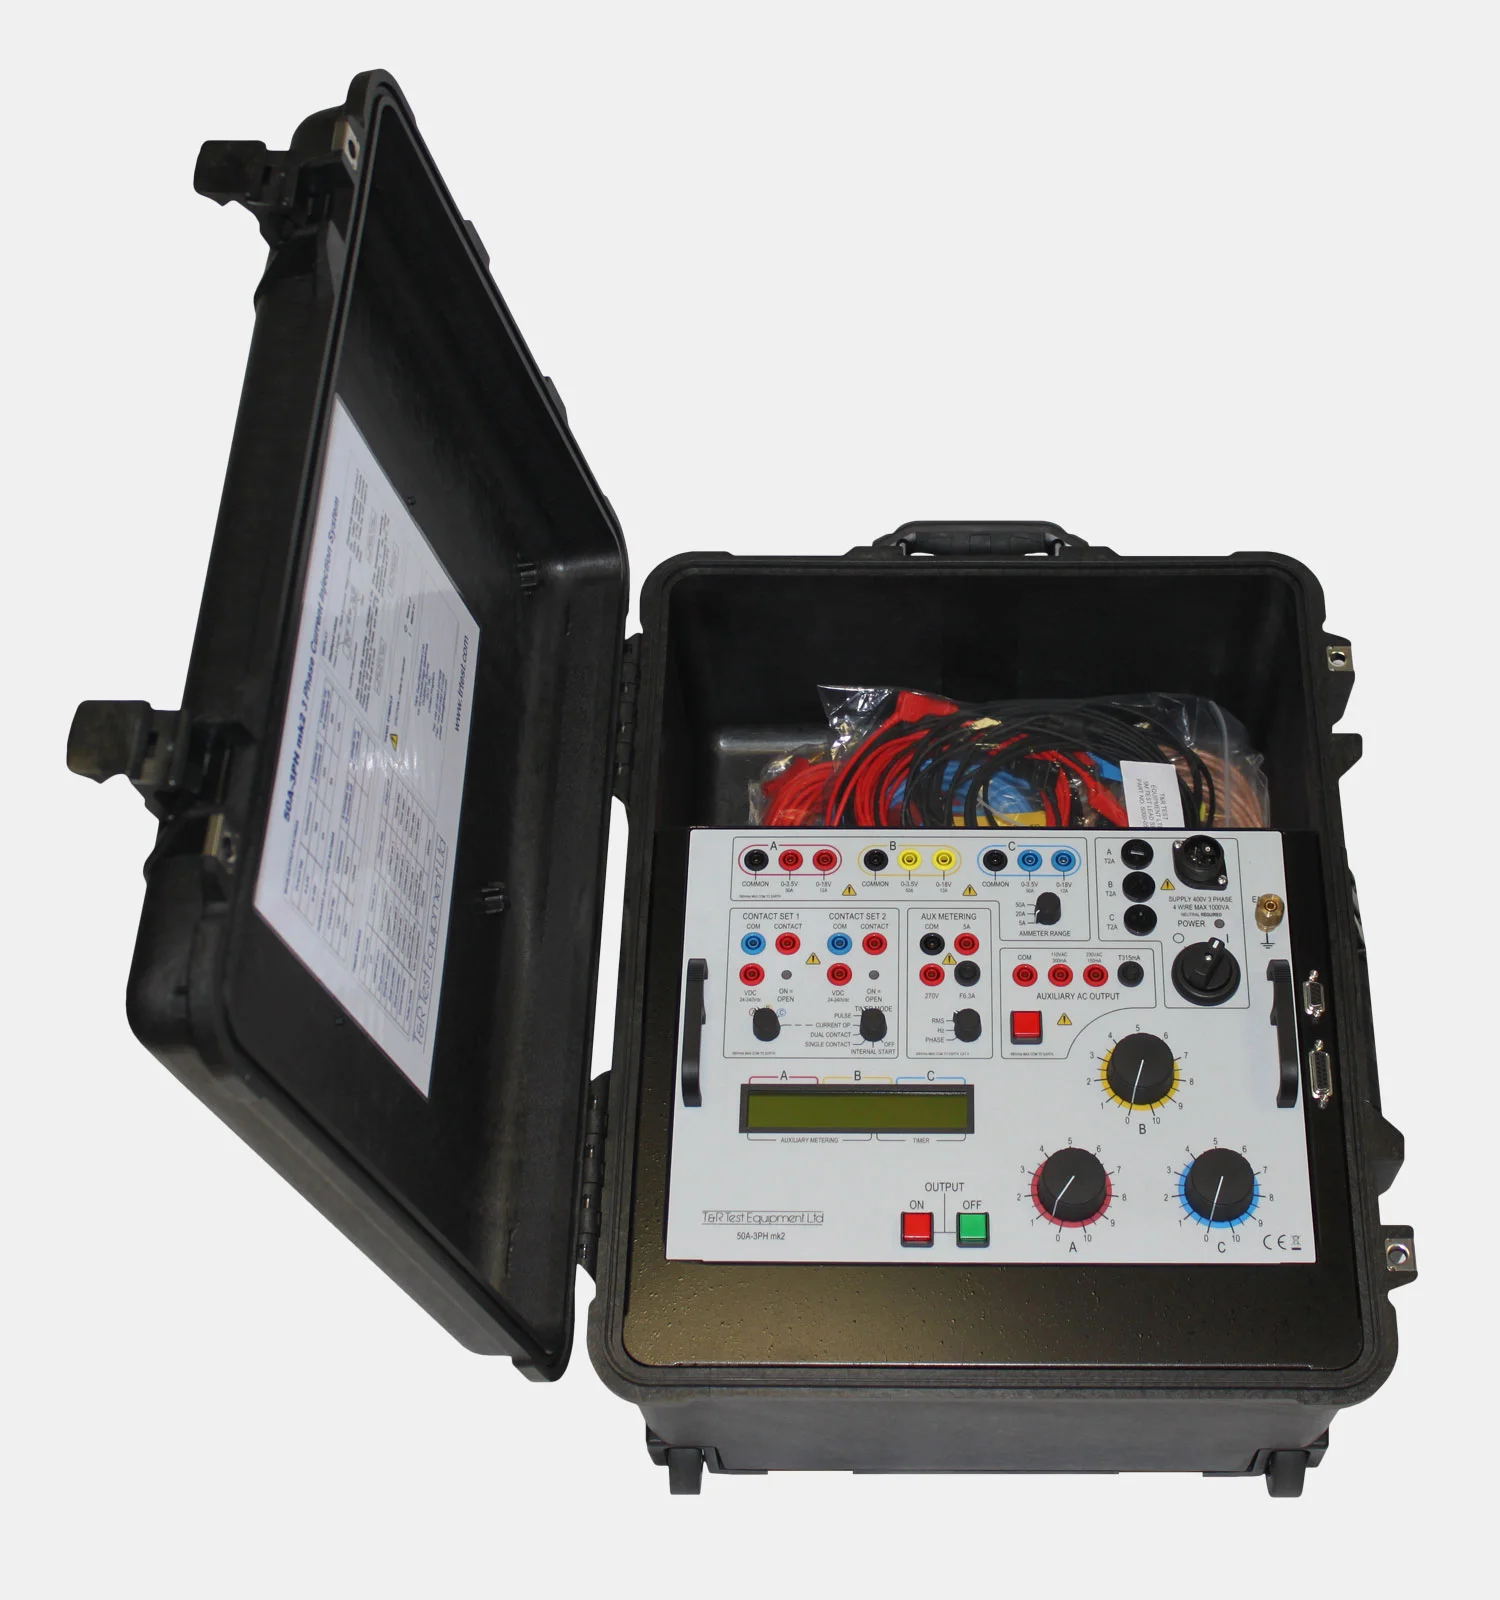 Suppliers of 50A-3PH MK2 Secondary Current Injection Test Set UK